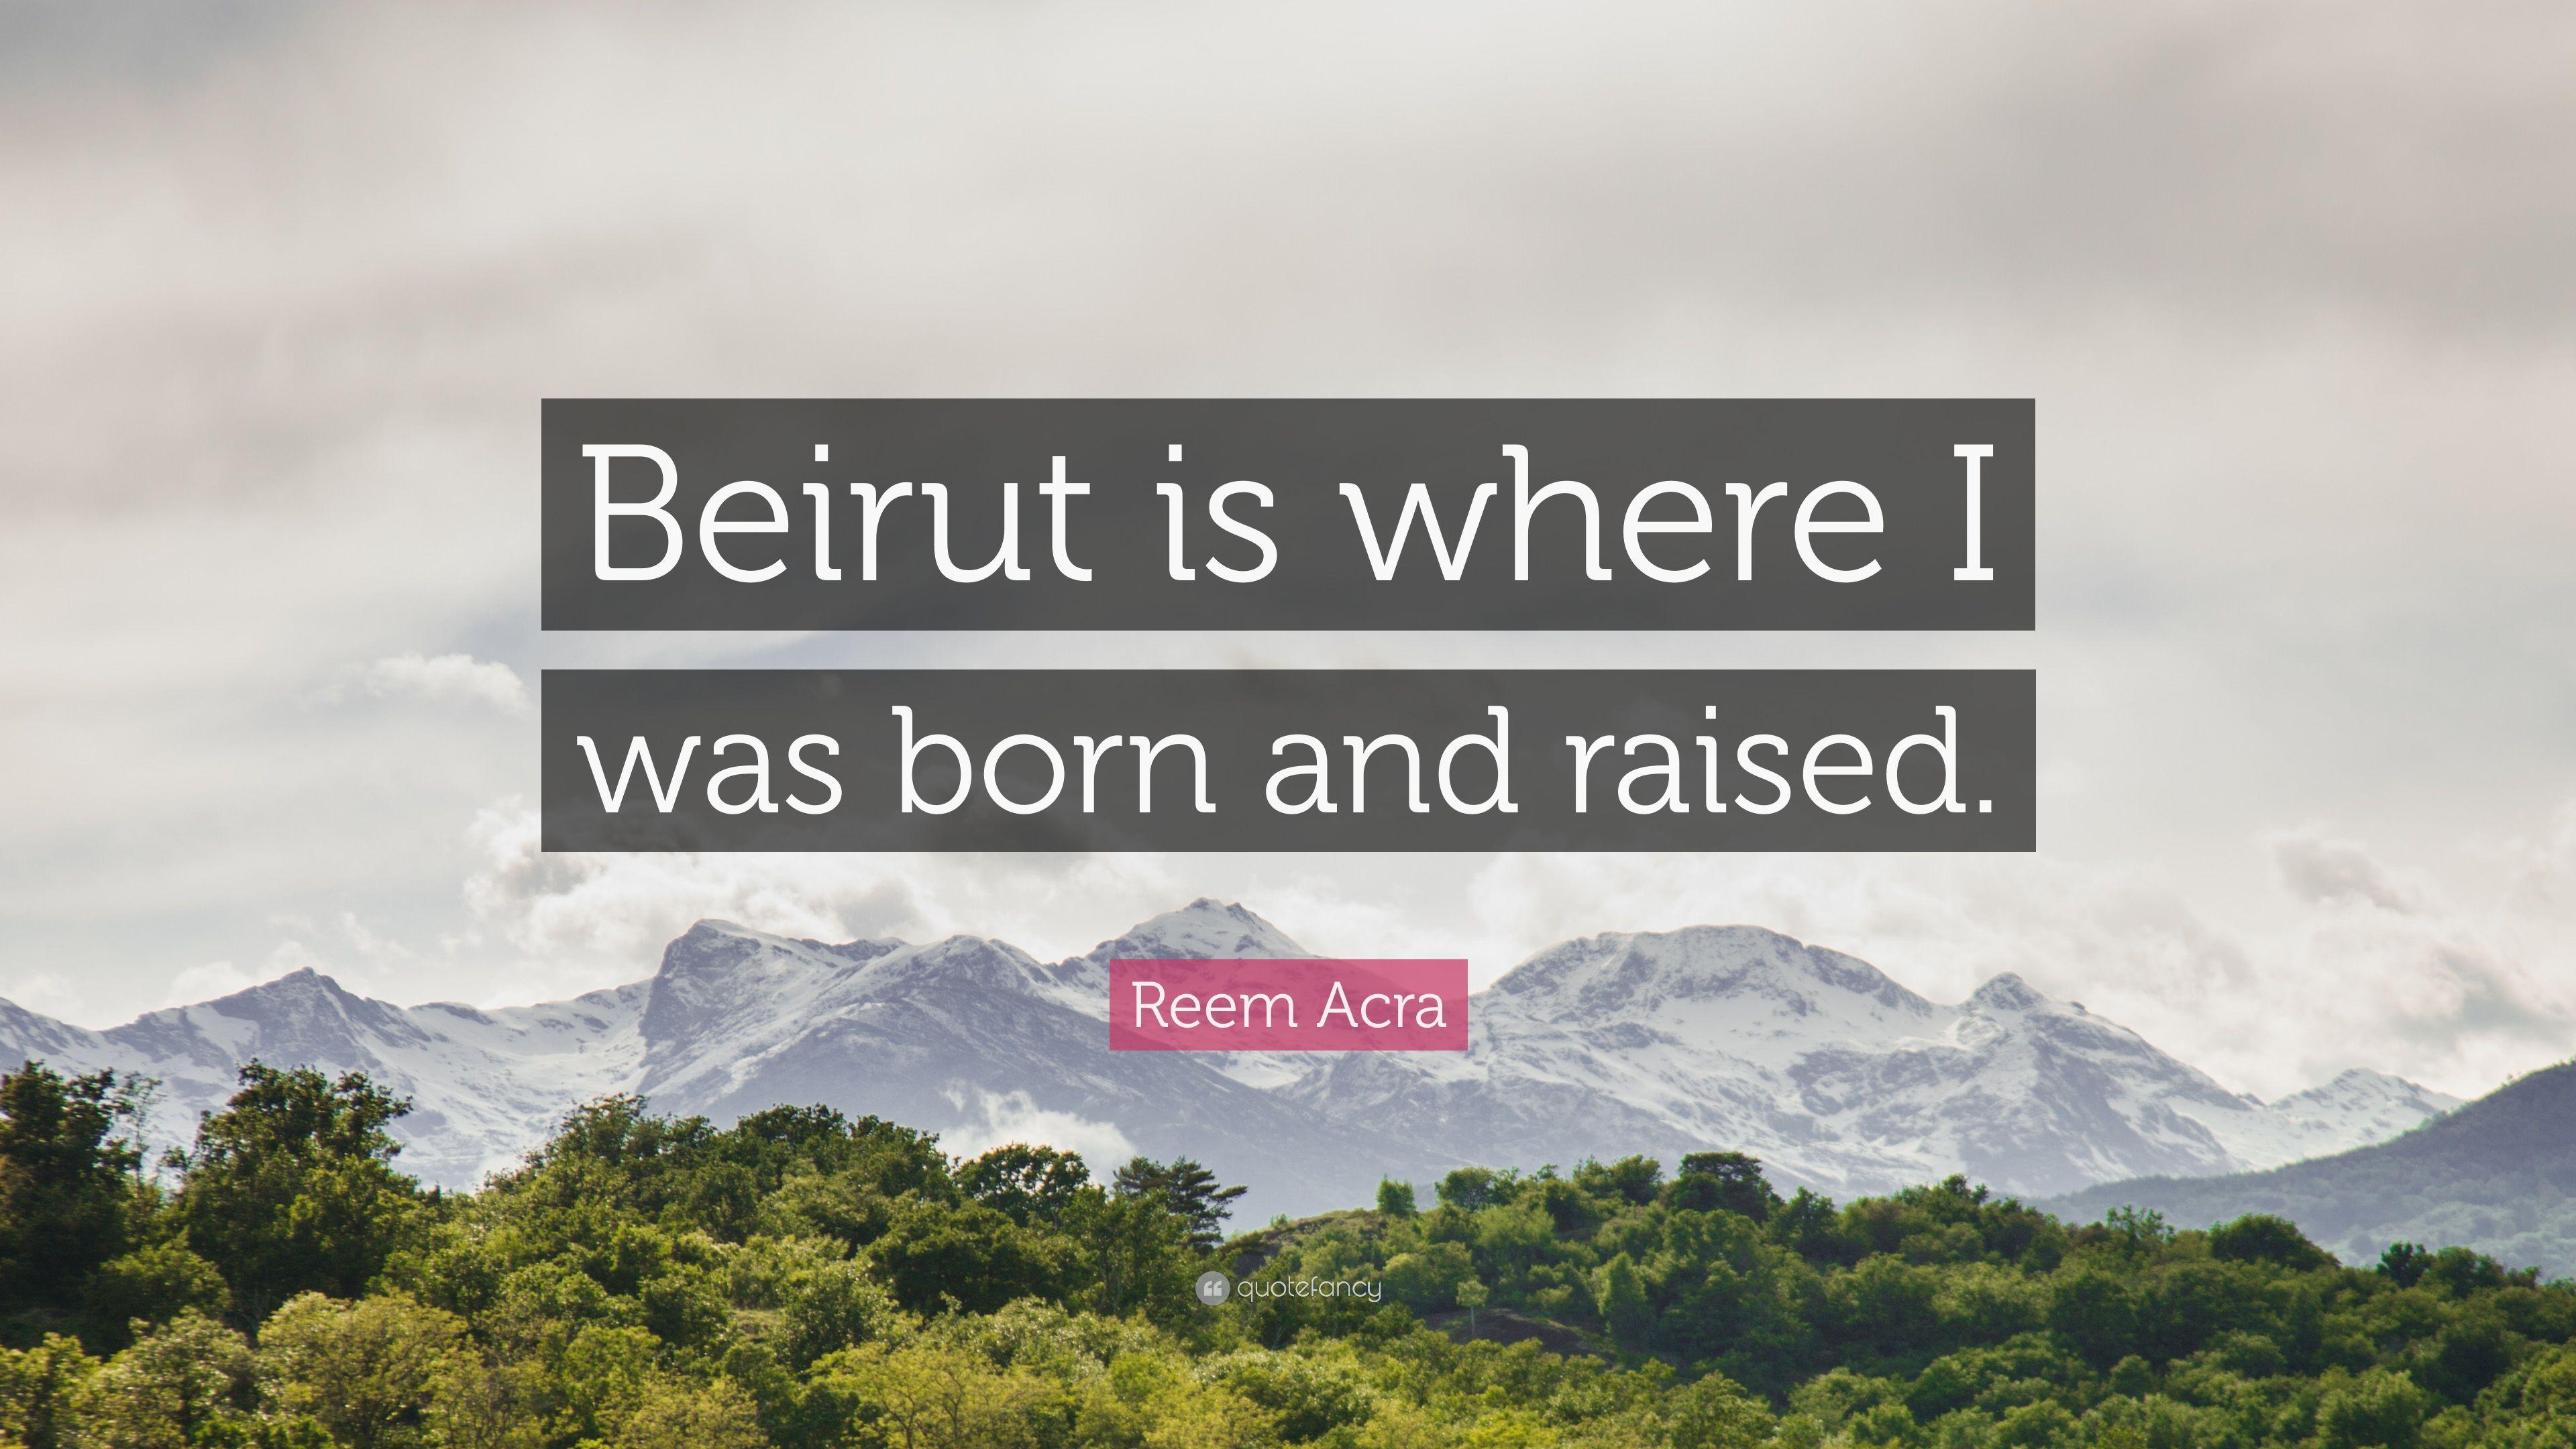 Reem Acra Quote: “Beirut is where I was born and raised.” 7